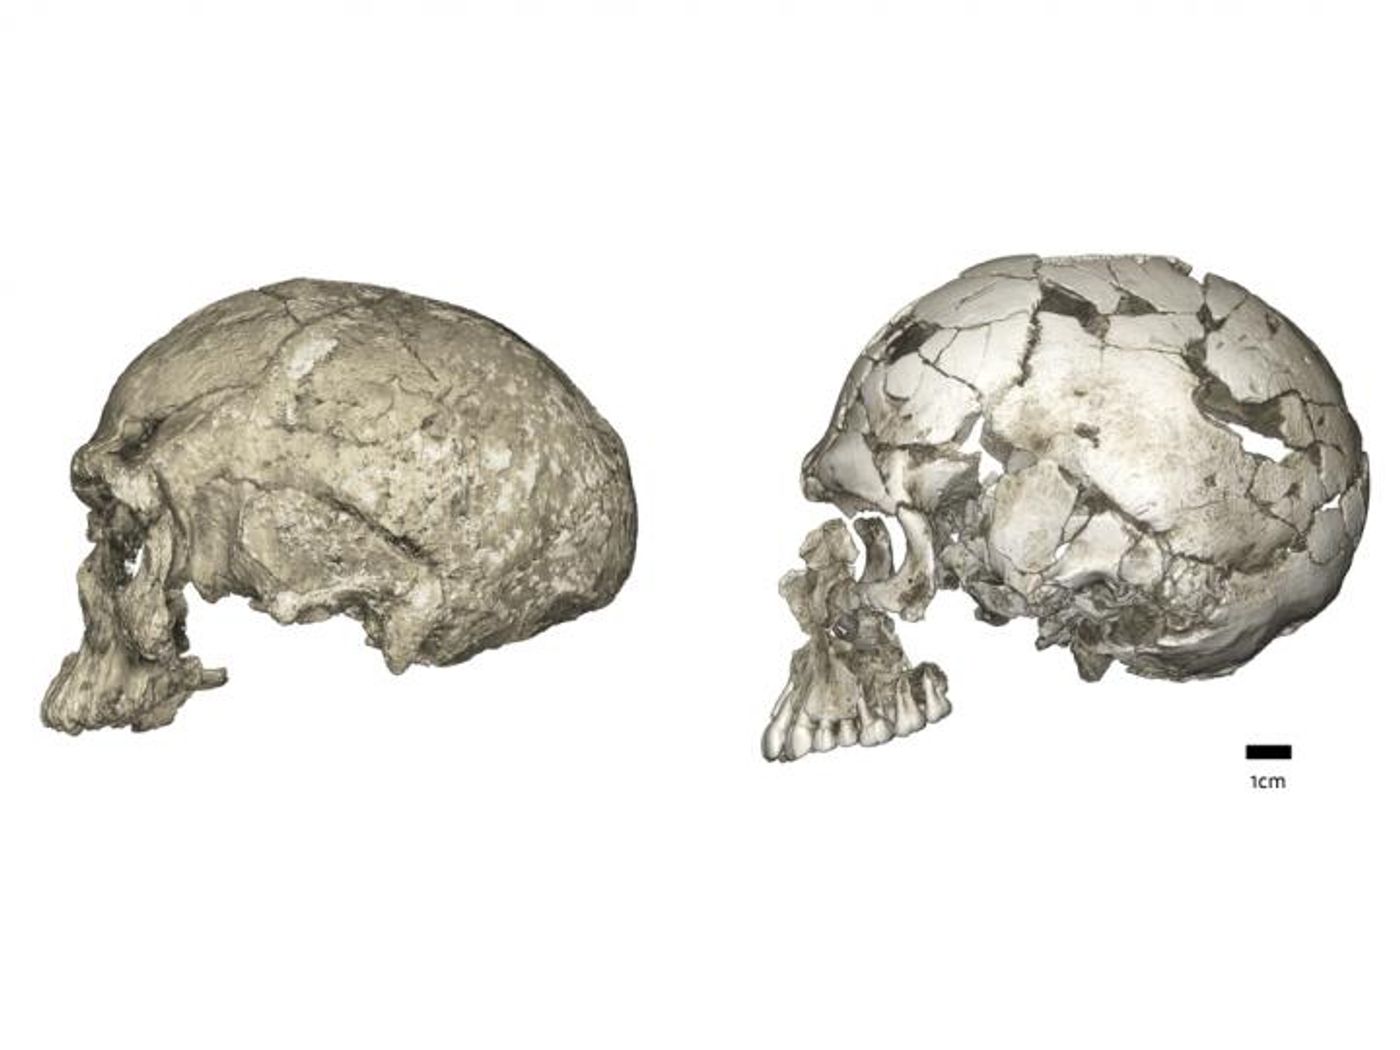 Evolutionary changes of braincase shape from an elongated to a globular shape. The latter evolves within the Homo sapiens lineage via an expansion of the cerebellum and bulging of the parietal. Left: micro-CT scan of Jebel Irhoud 1 (~300 ka, Africa); Right: Qafzeh 9 (~95 ka, the Levant). / Credit: Philipp Gunz, Max Planck Institute for Evolutionary Anthropology